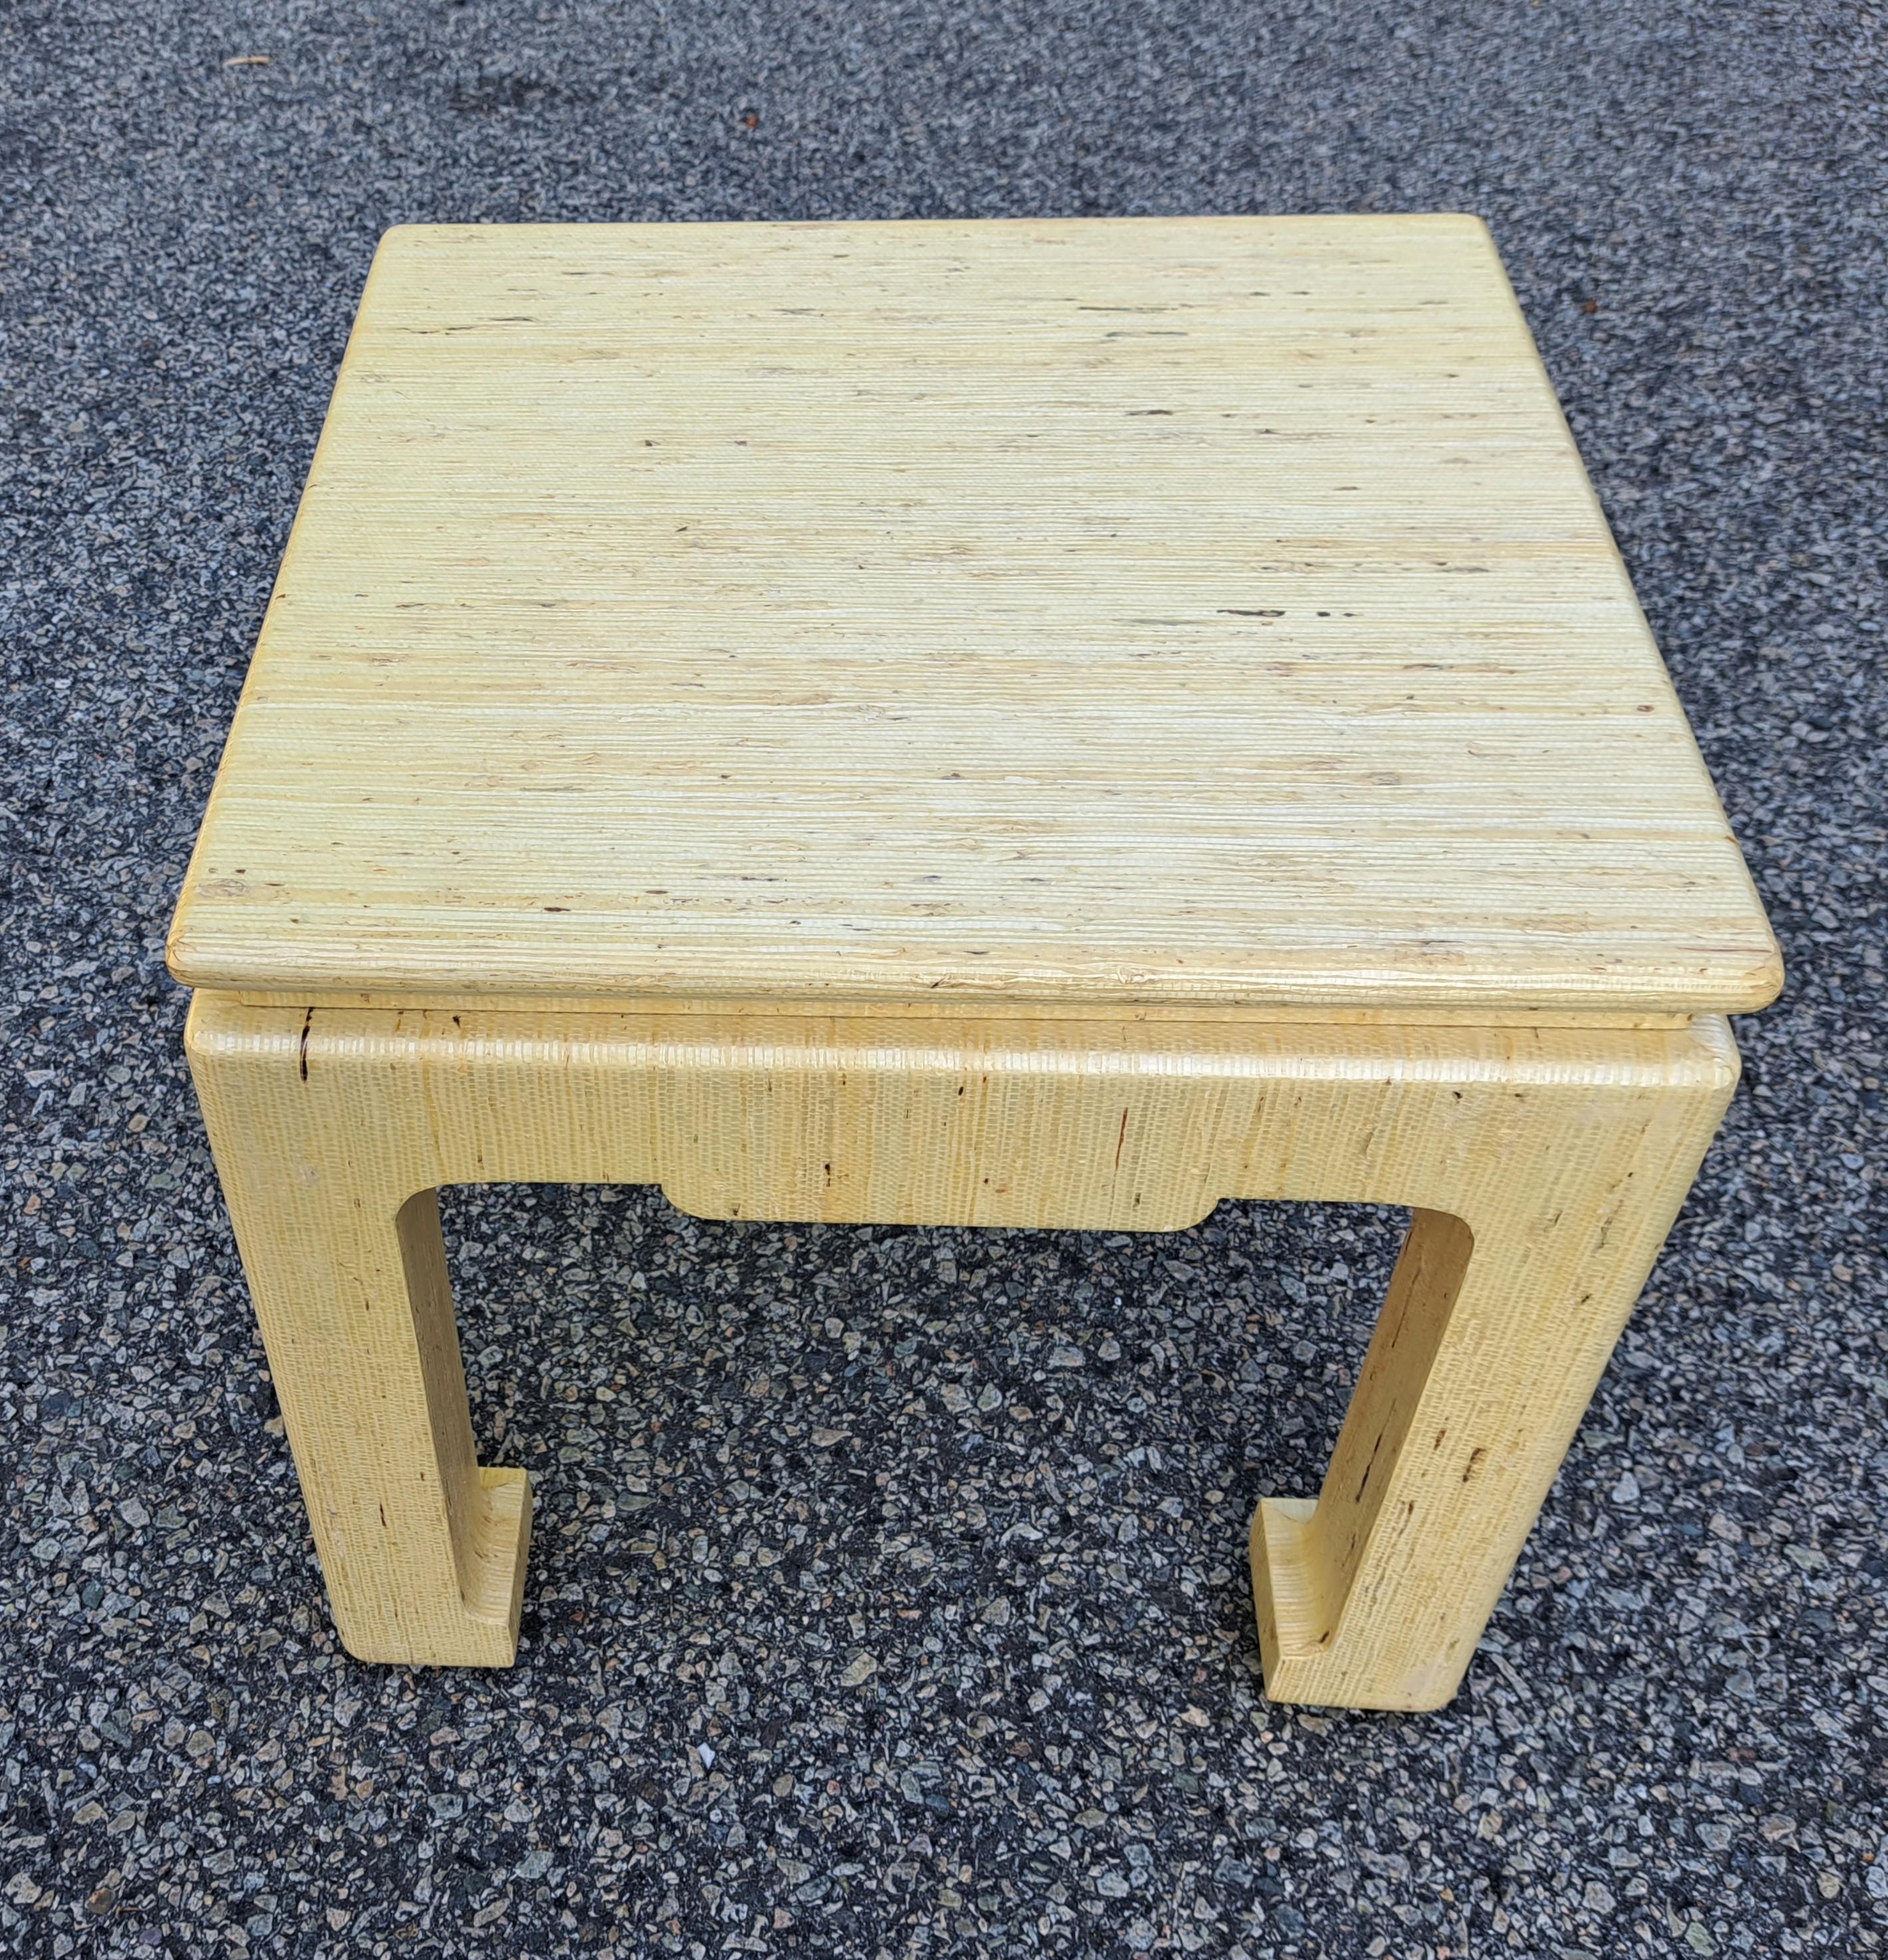 Pair of Baker Furniture Company small Asian side tables. Ligt yellow tables are covered in lacquered grass cloth. Size and portability make these tables perfect for small or large areas.